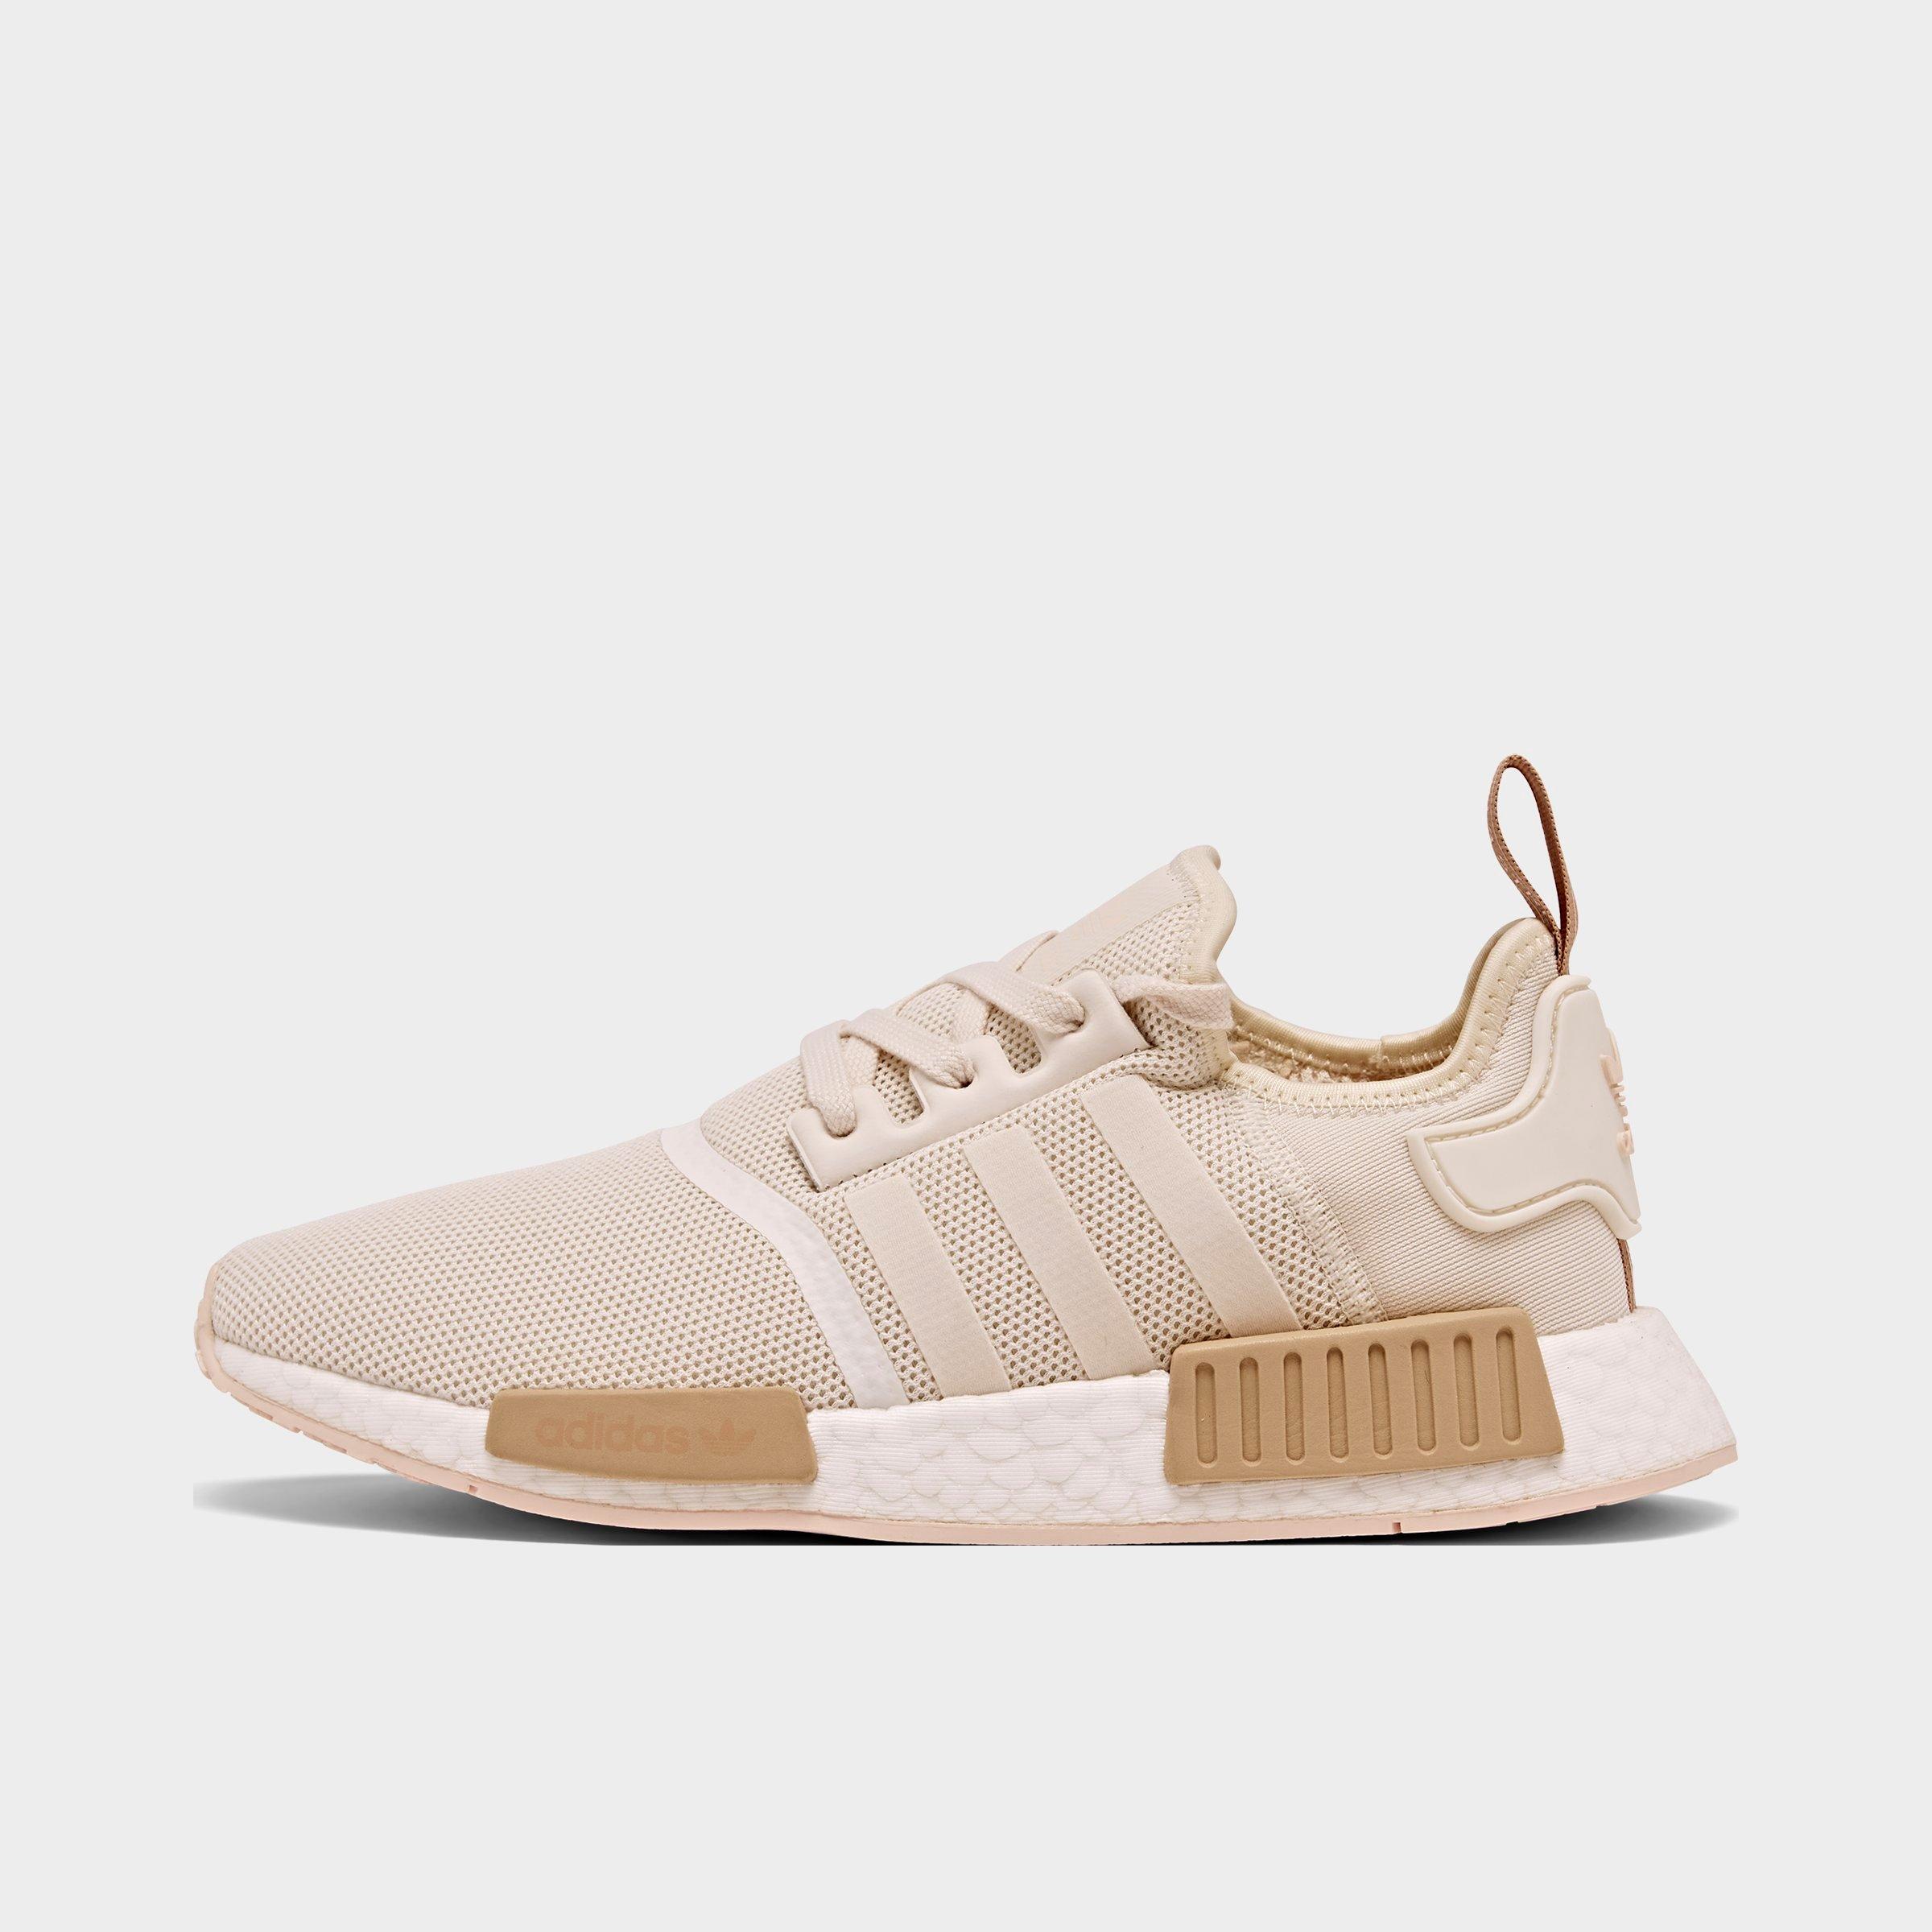 adidas women's nmd r1 casual sneakers